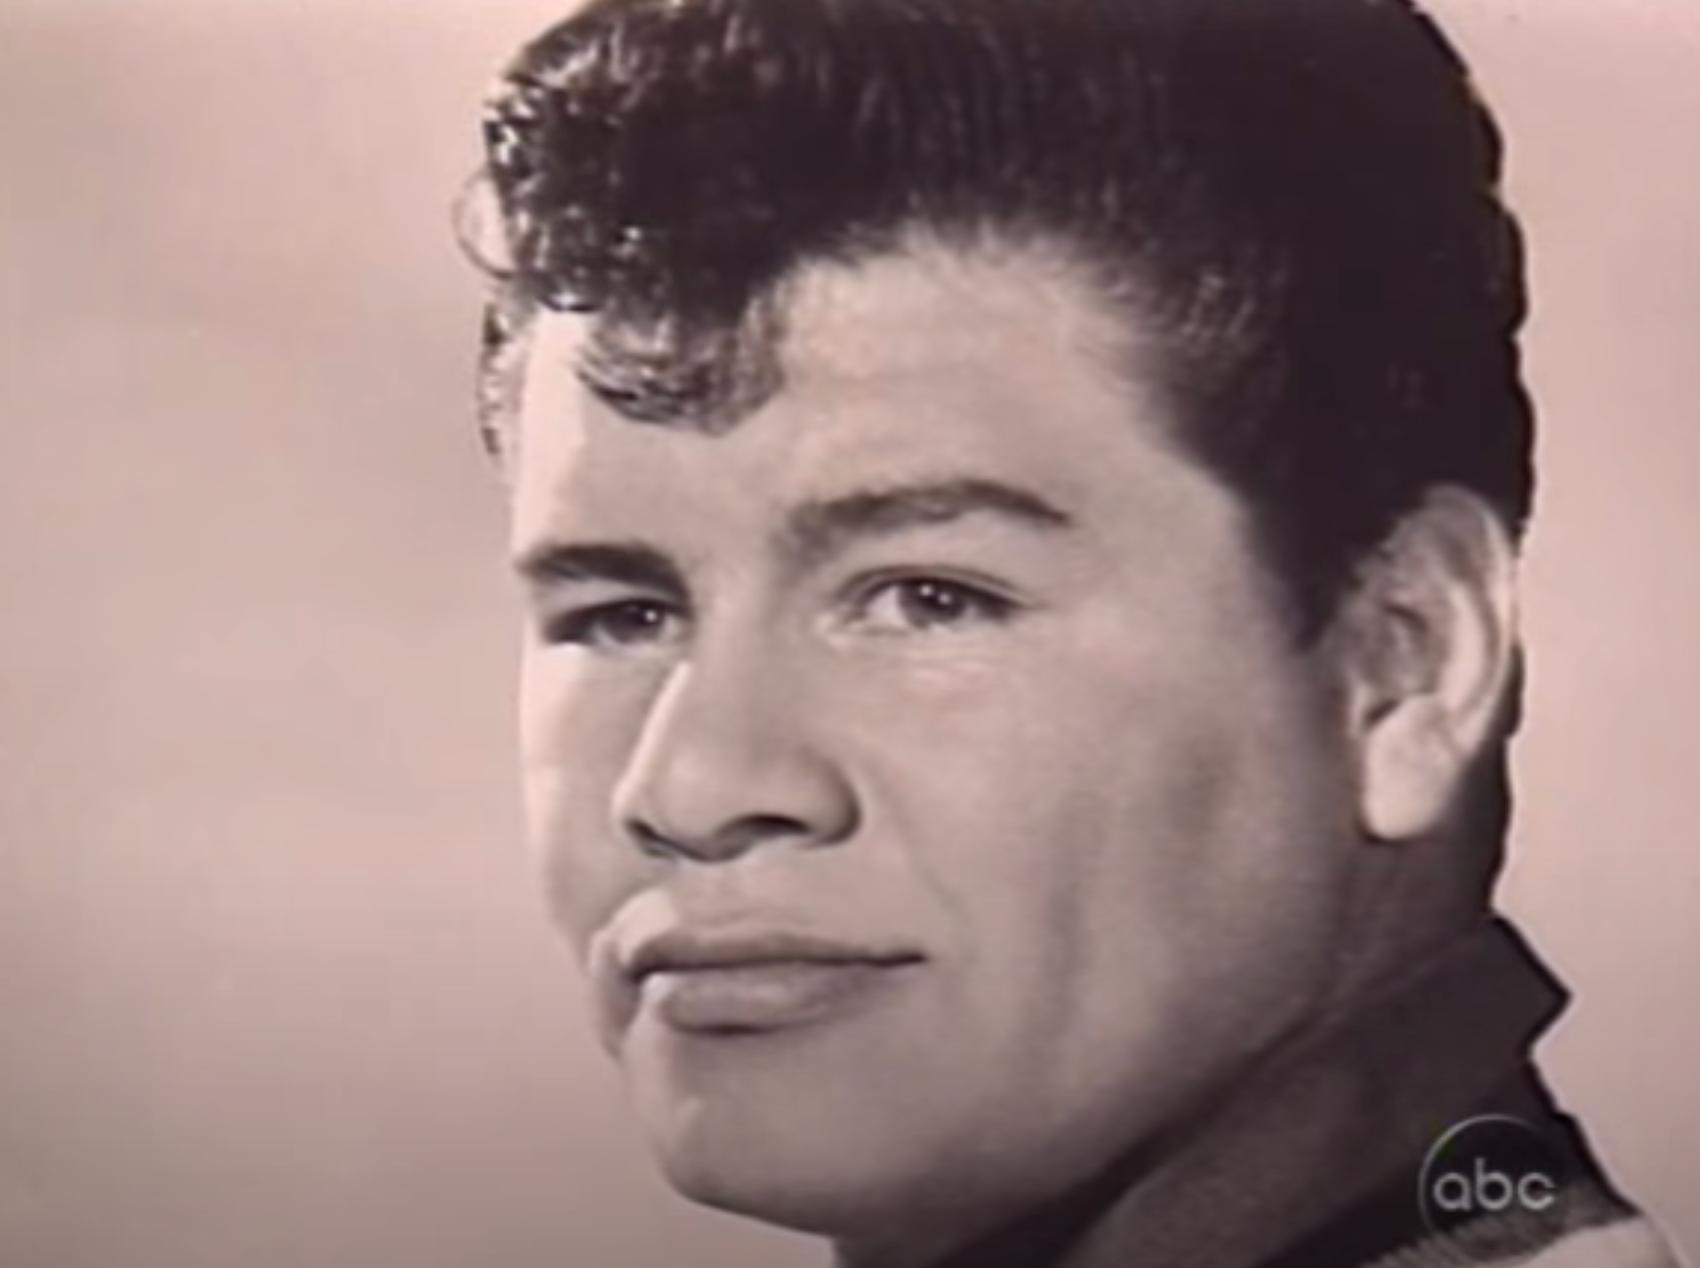 What Happened To Ritchie Valens And Donna Their Romance Is So Sad